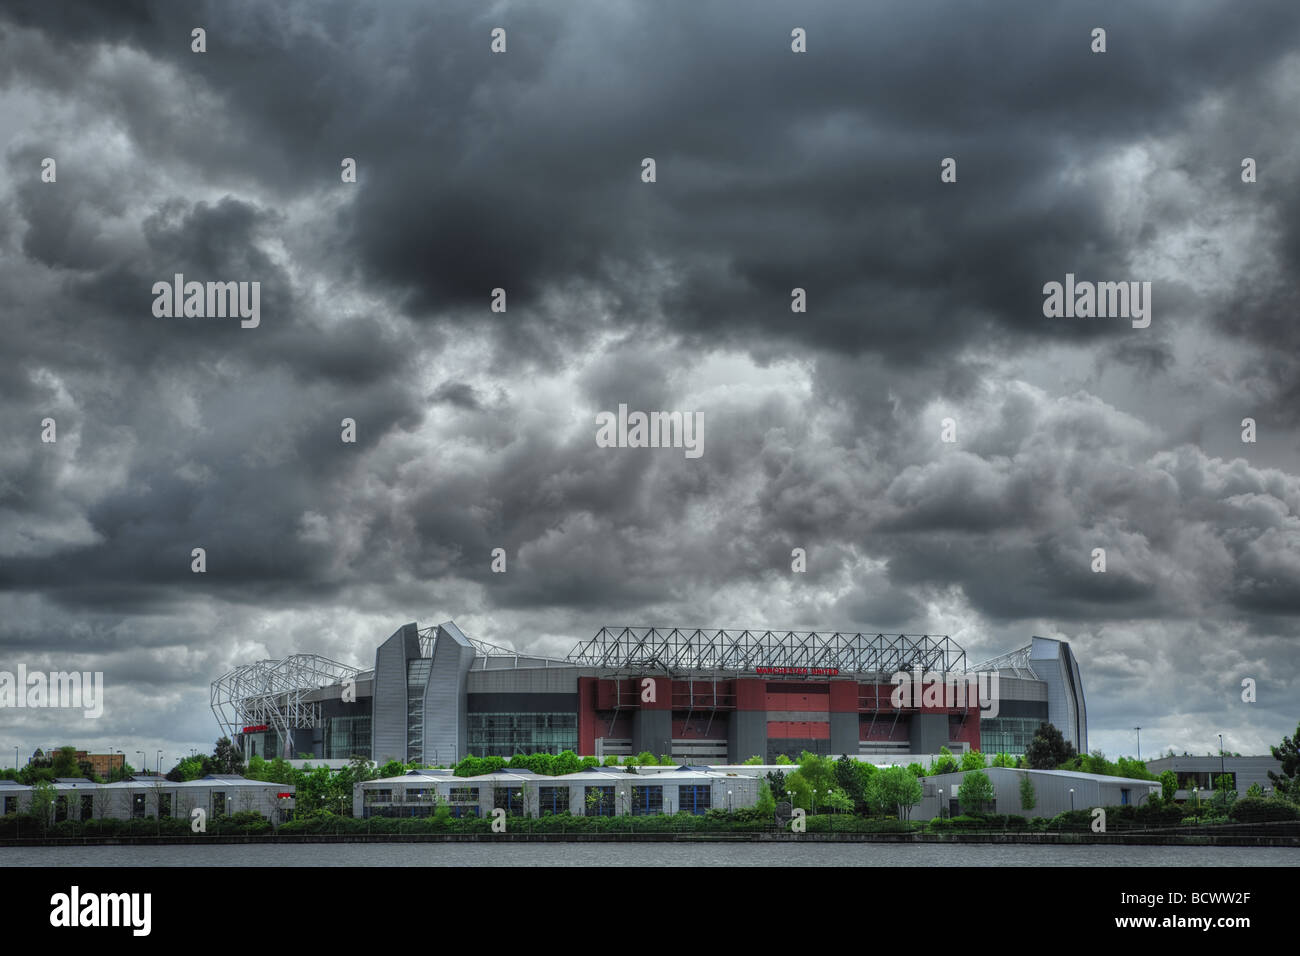 "Manchester United Old Trafford Football Ground' Banque D'Images